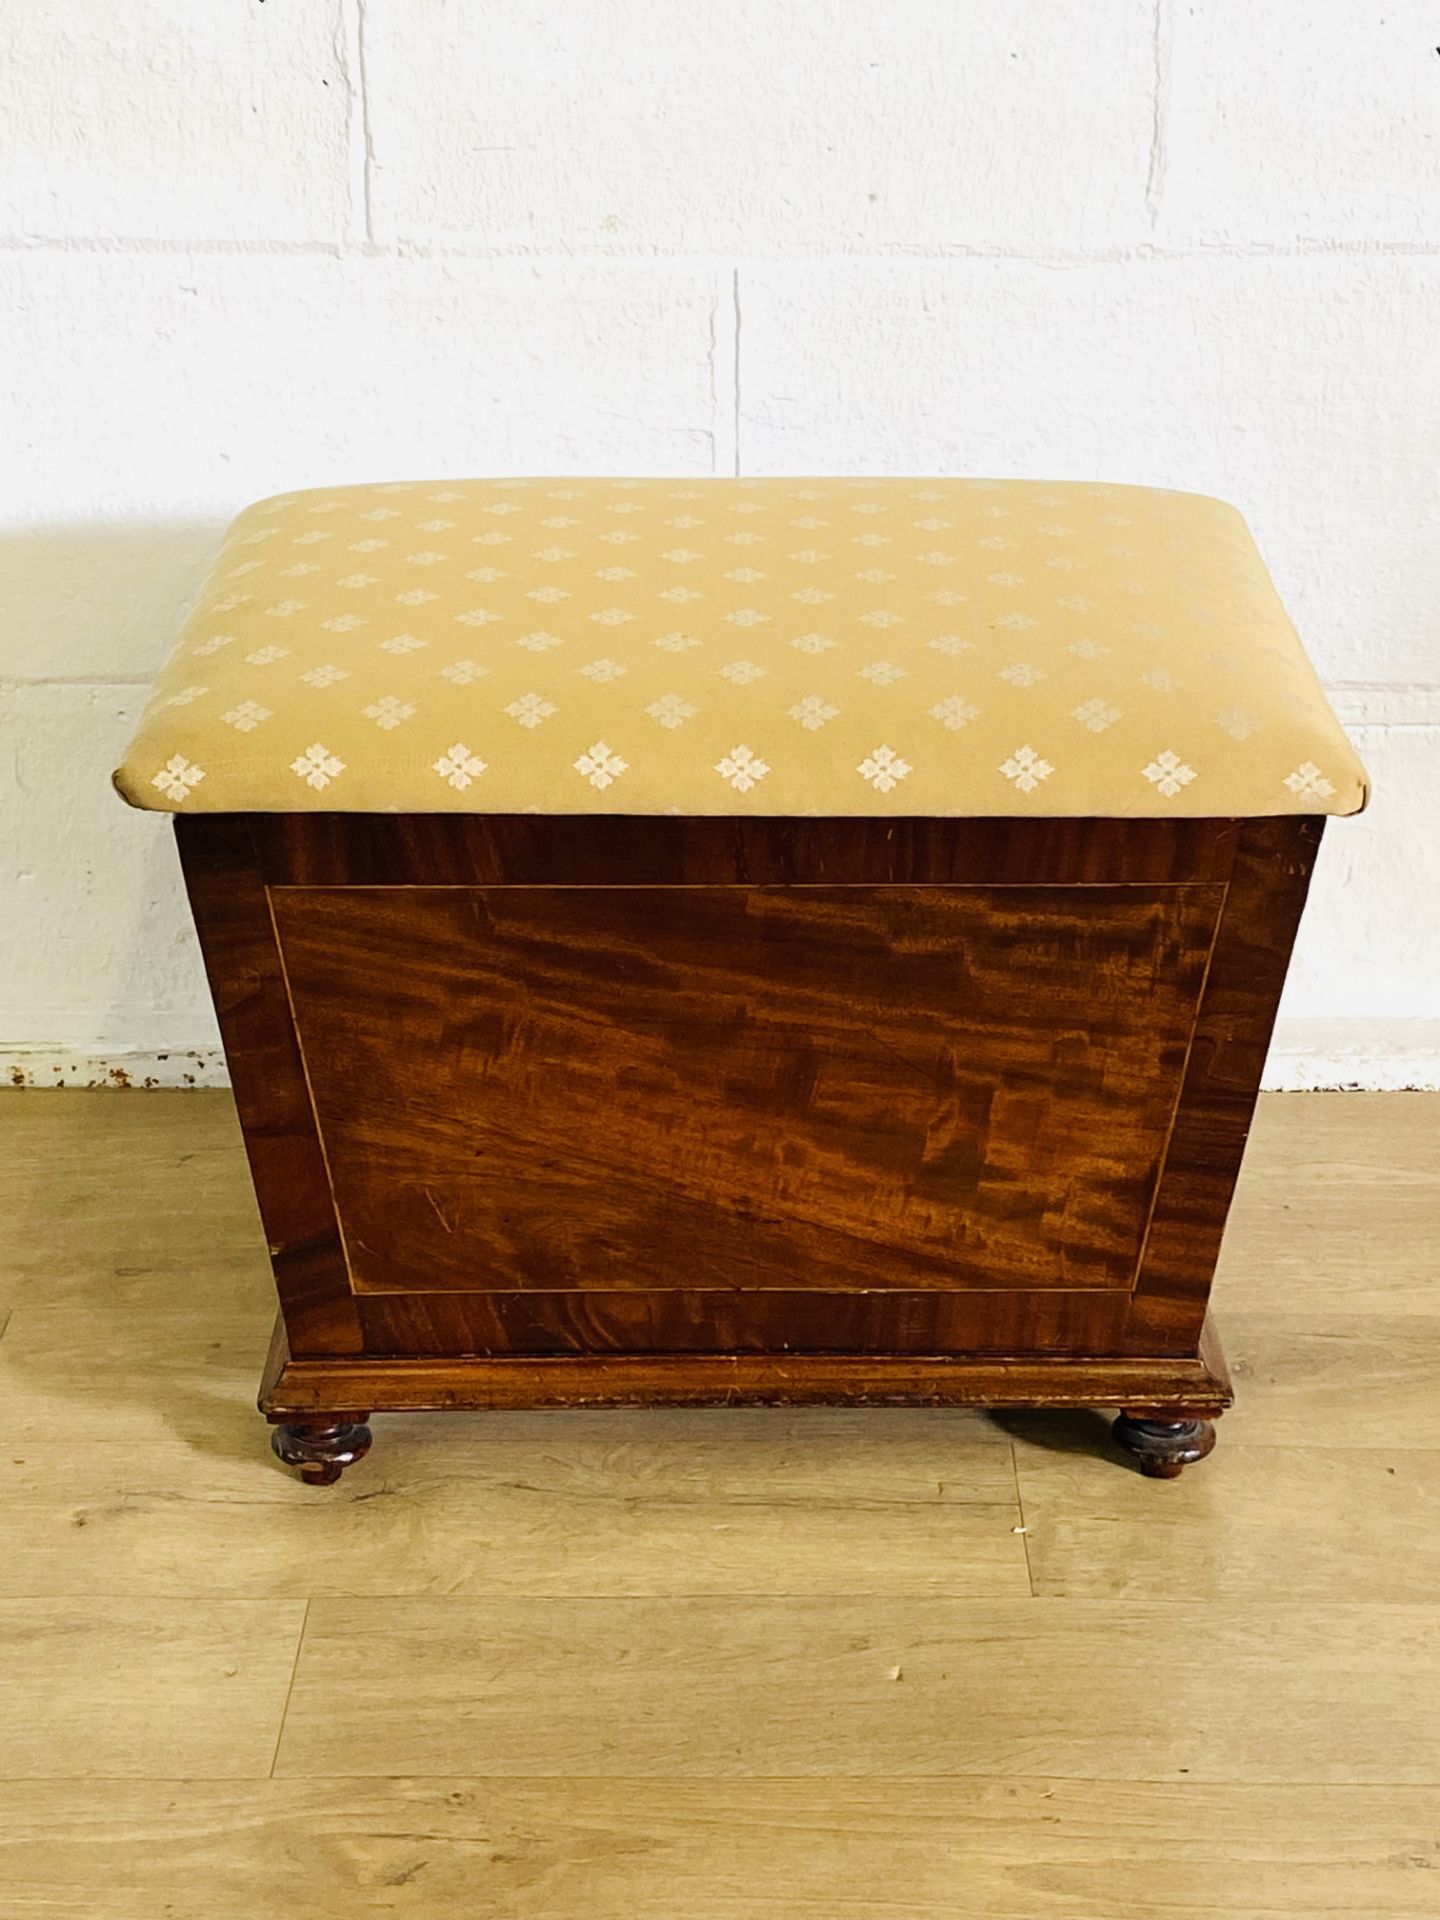 Victorian ottoman with padded seat